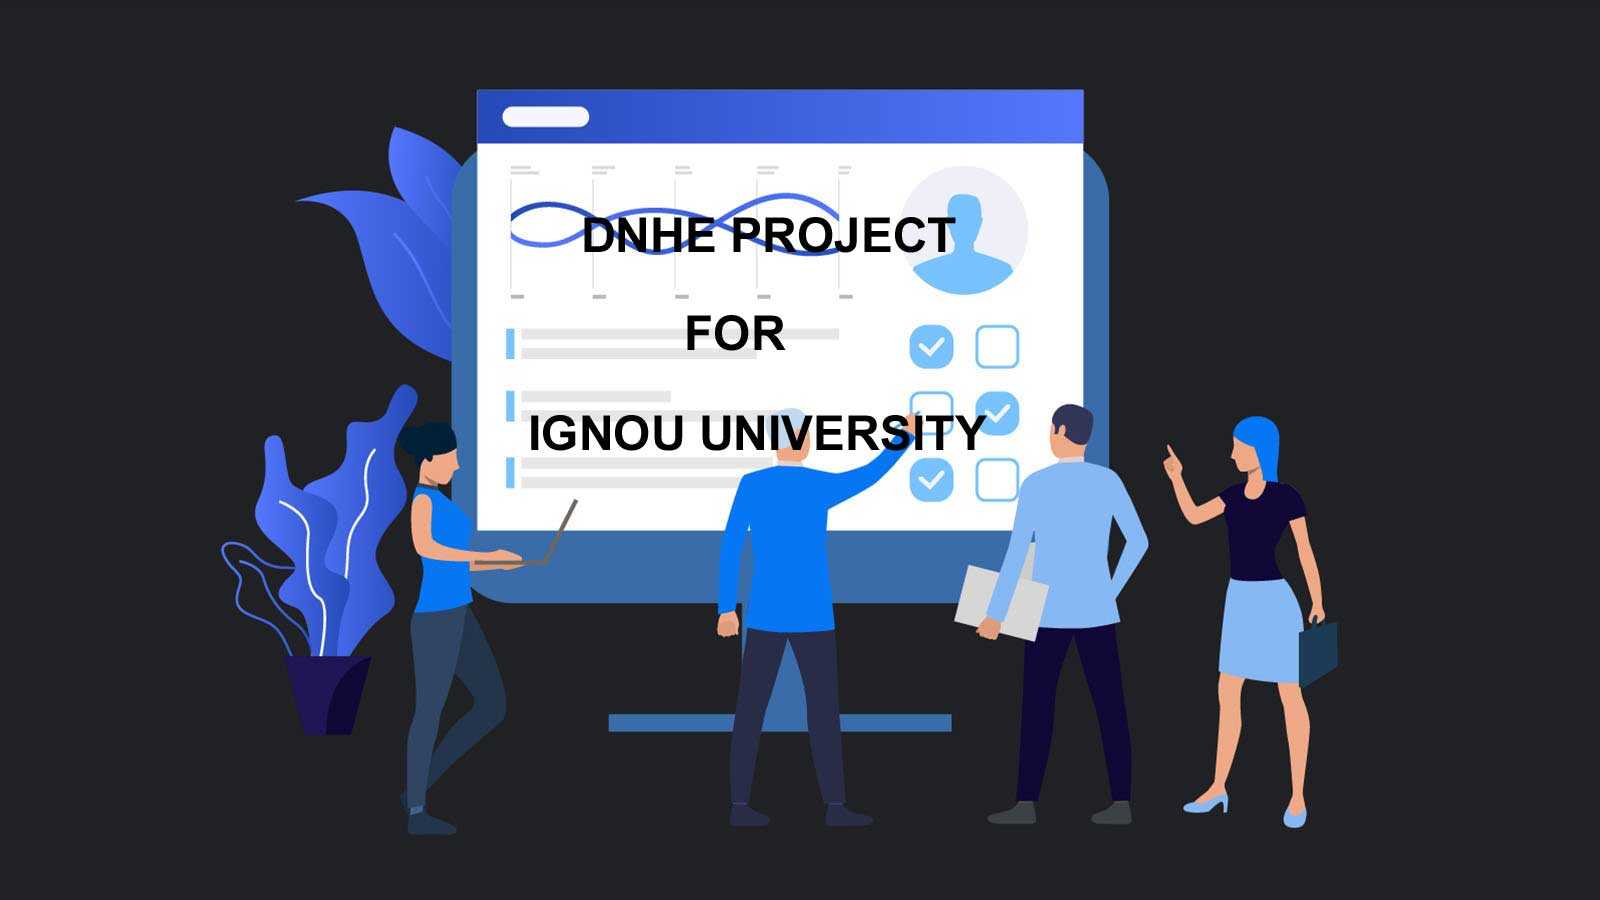 Ignou DNHE Project